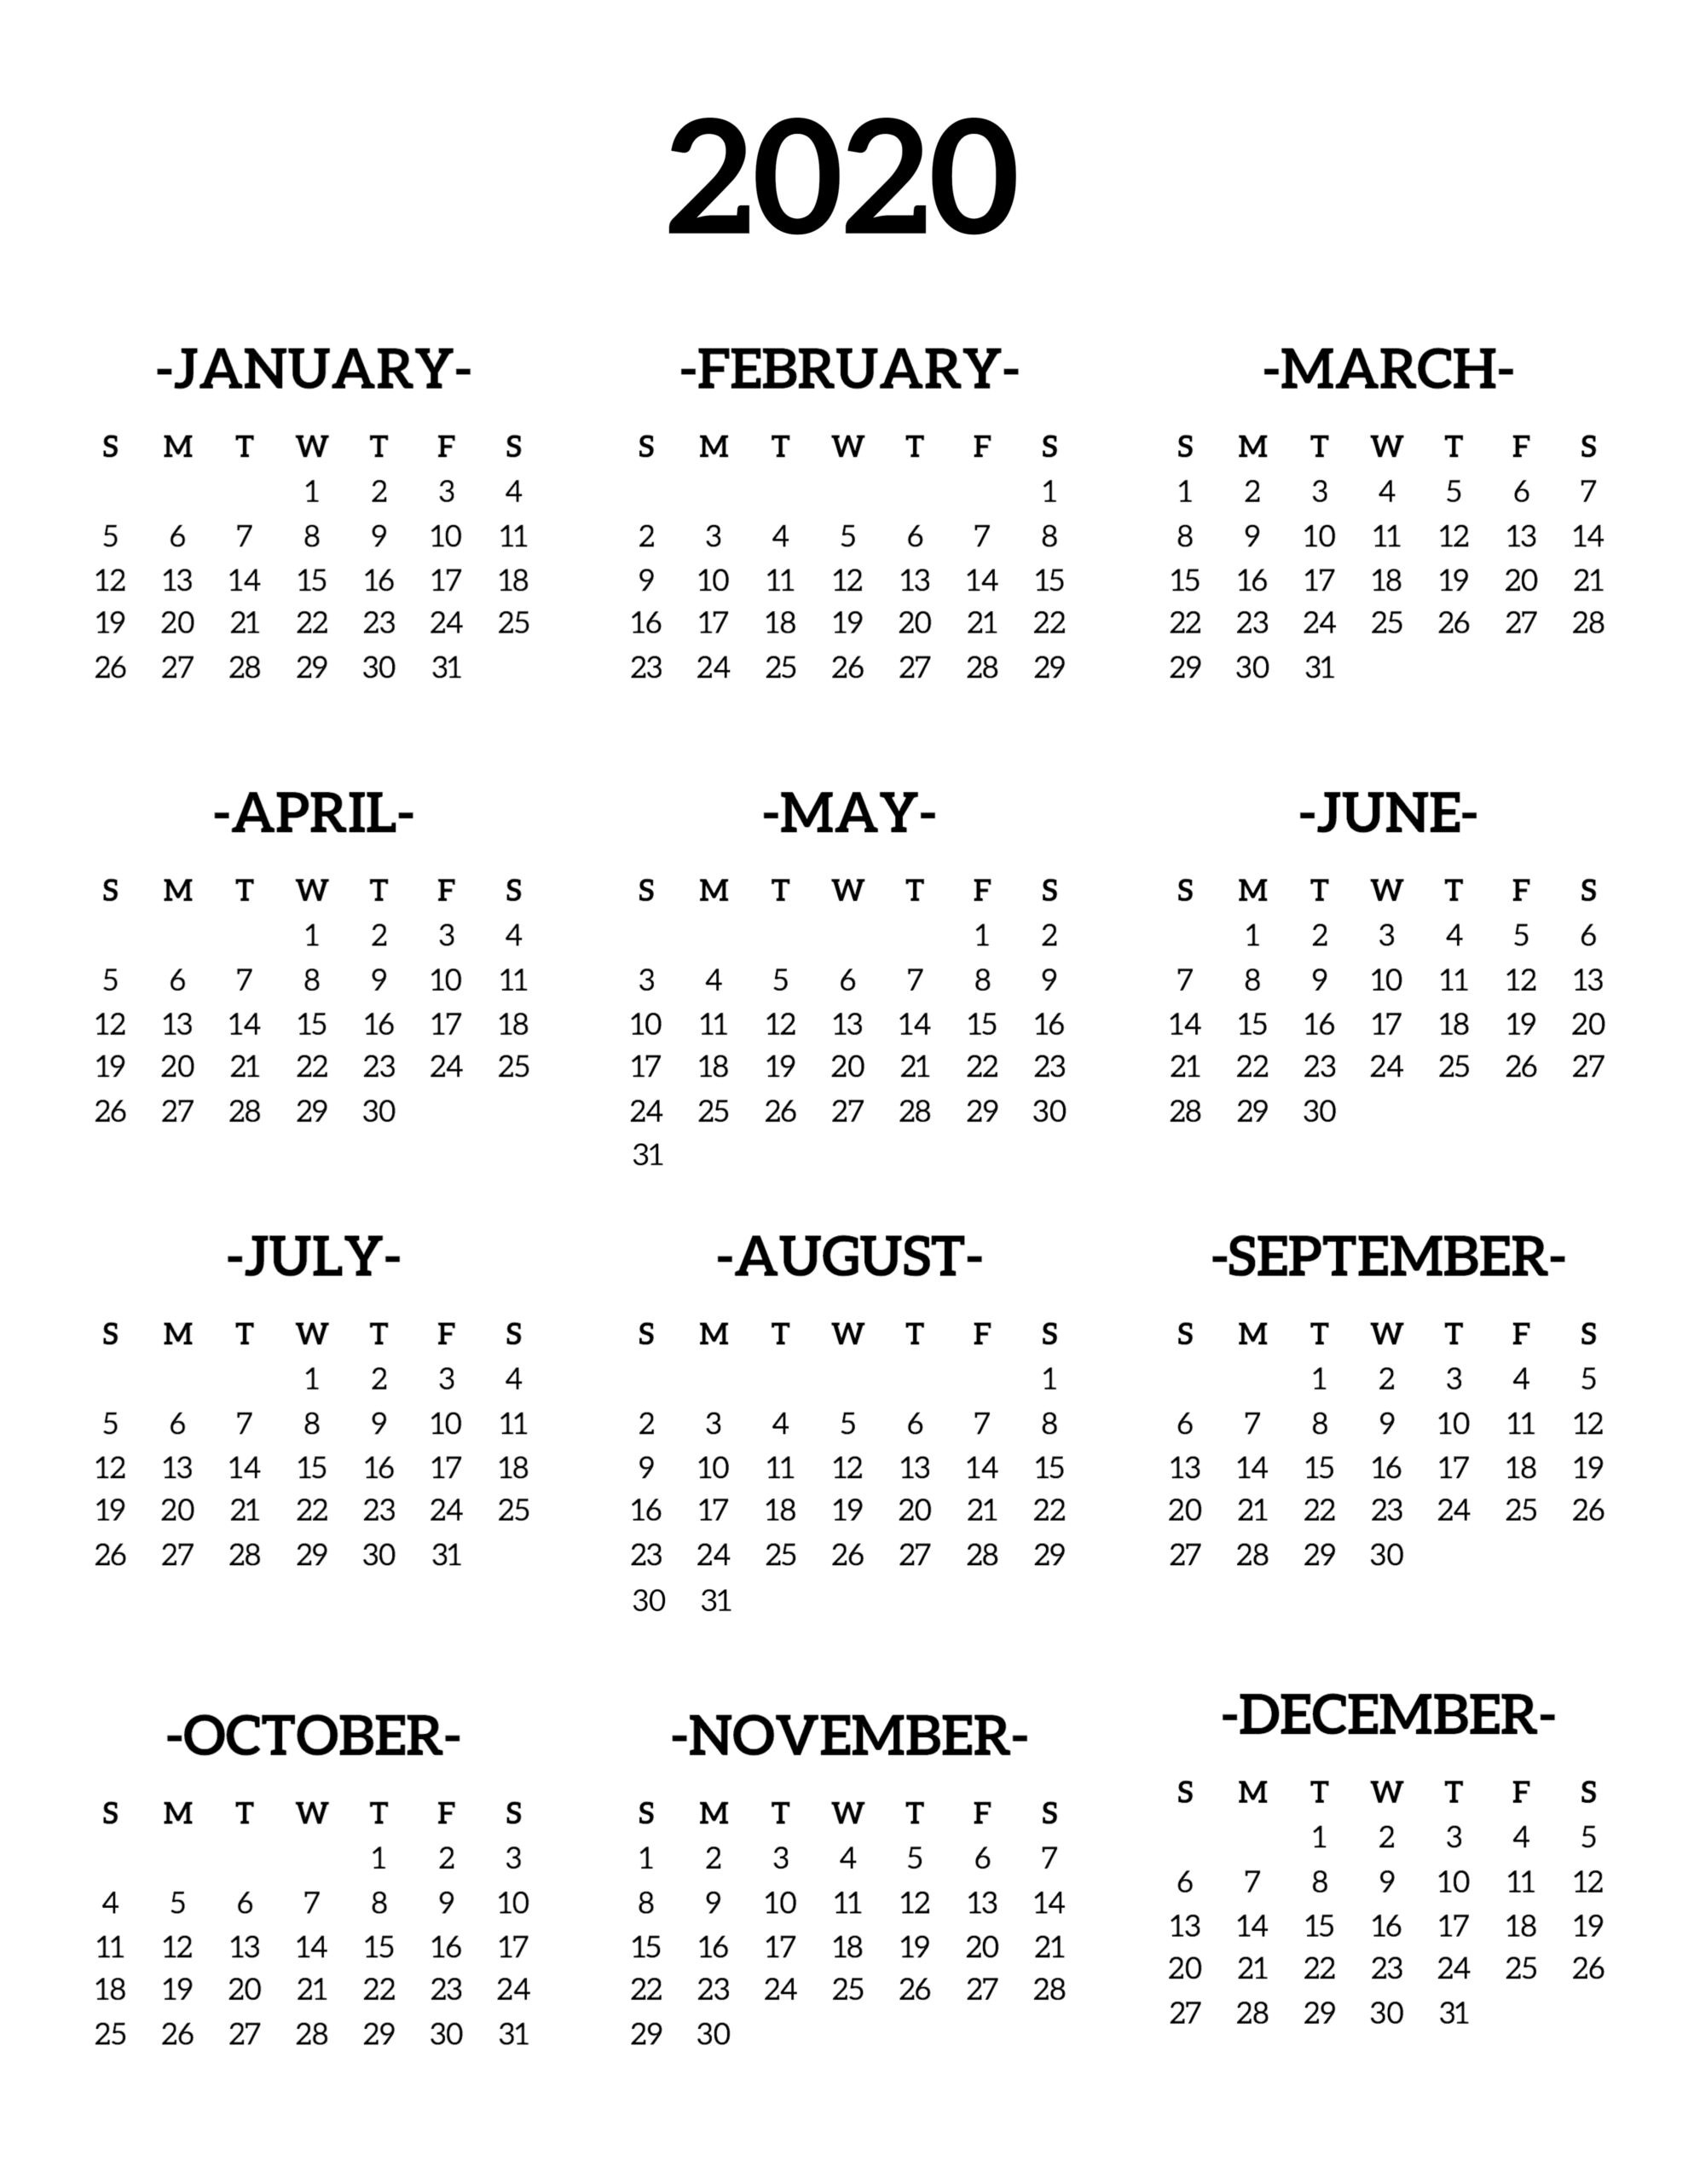 Calendar 2020 Printable One Page - Paper Trail Design  Where I Print A Full Page Monthly Calendar For 2020